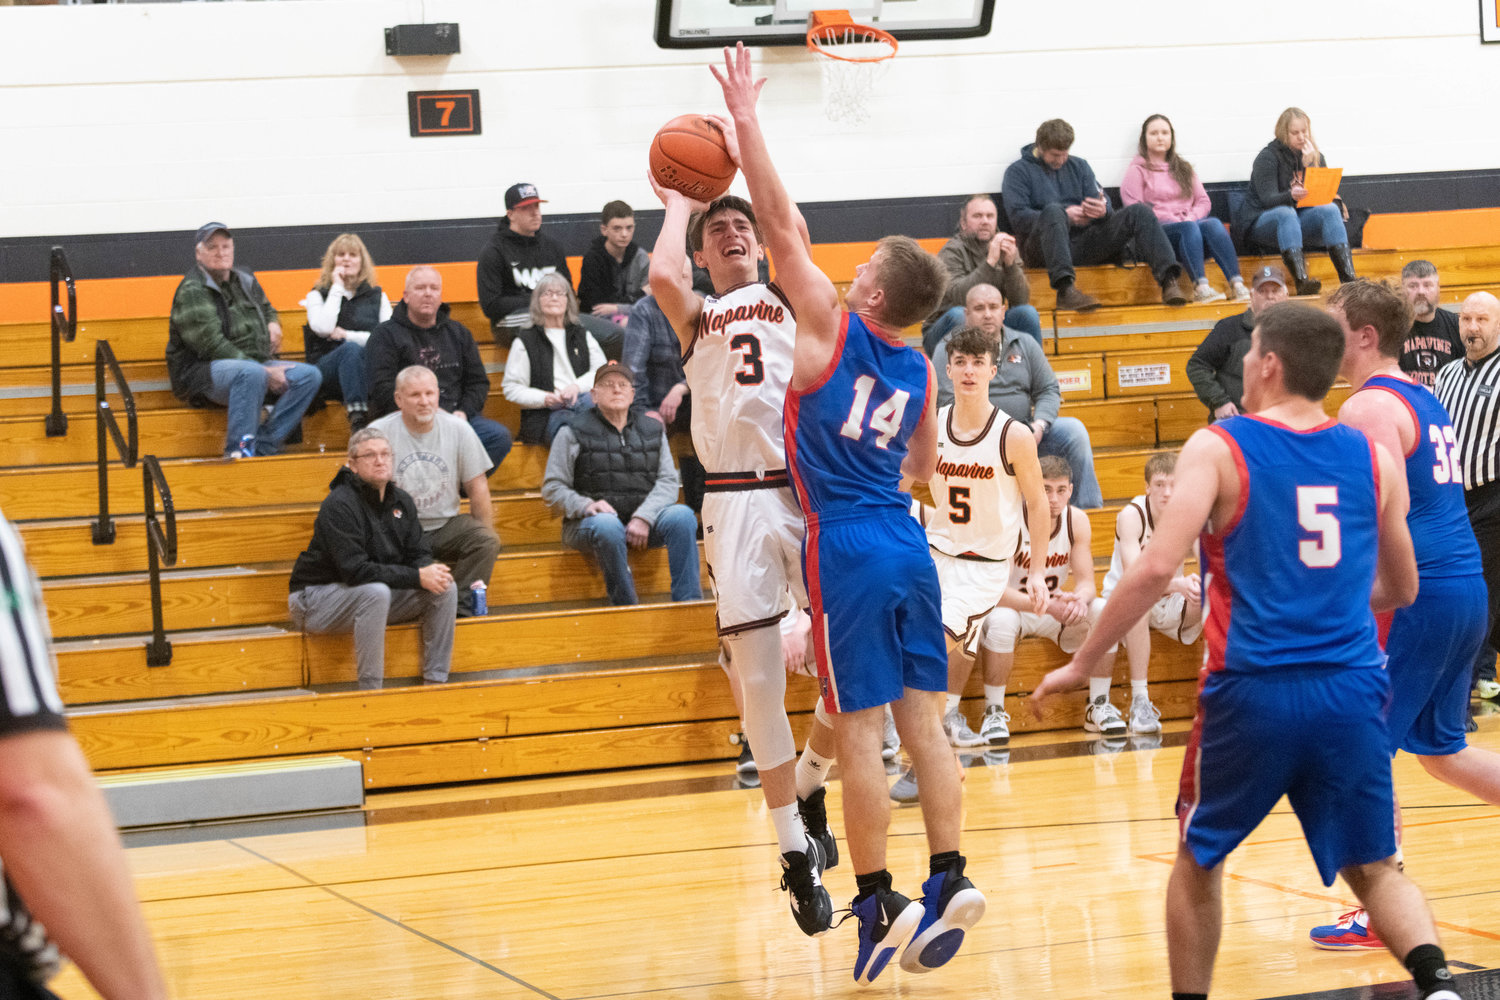 James Grose hits a contested fadeaway to break the Napavine single-game scoring record with 45 points during the Tigers' 81-50 win over Willapa Valley on Dec. 27,